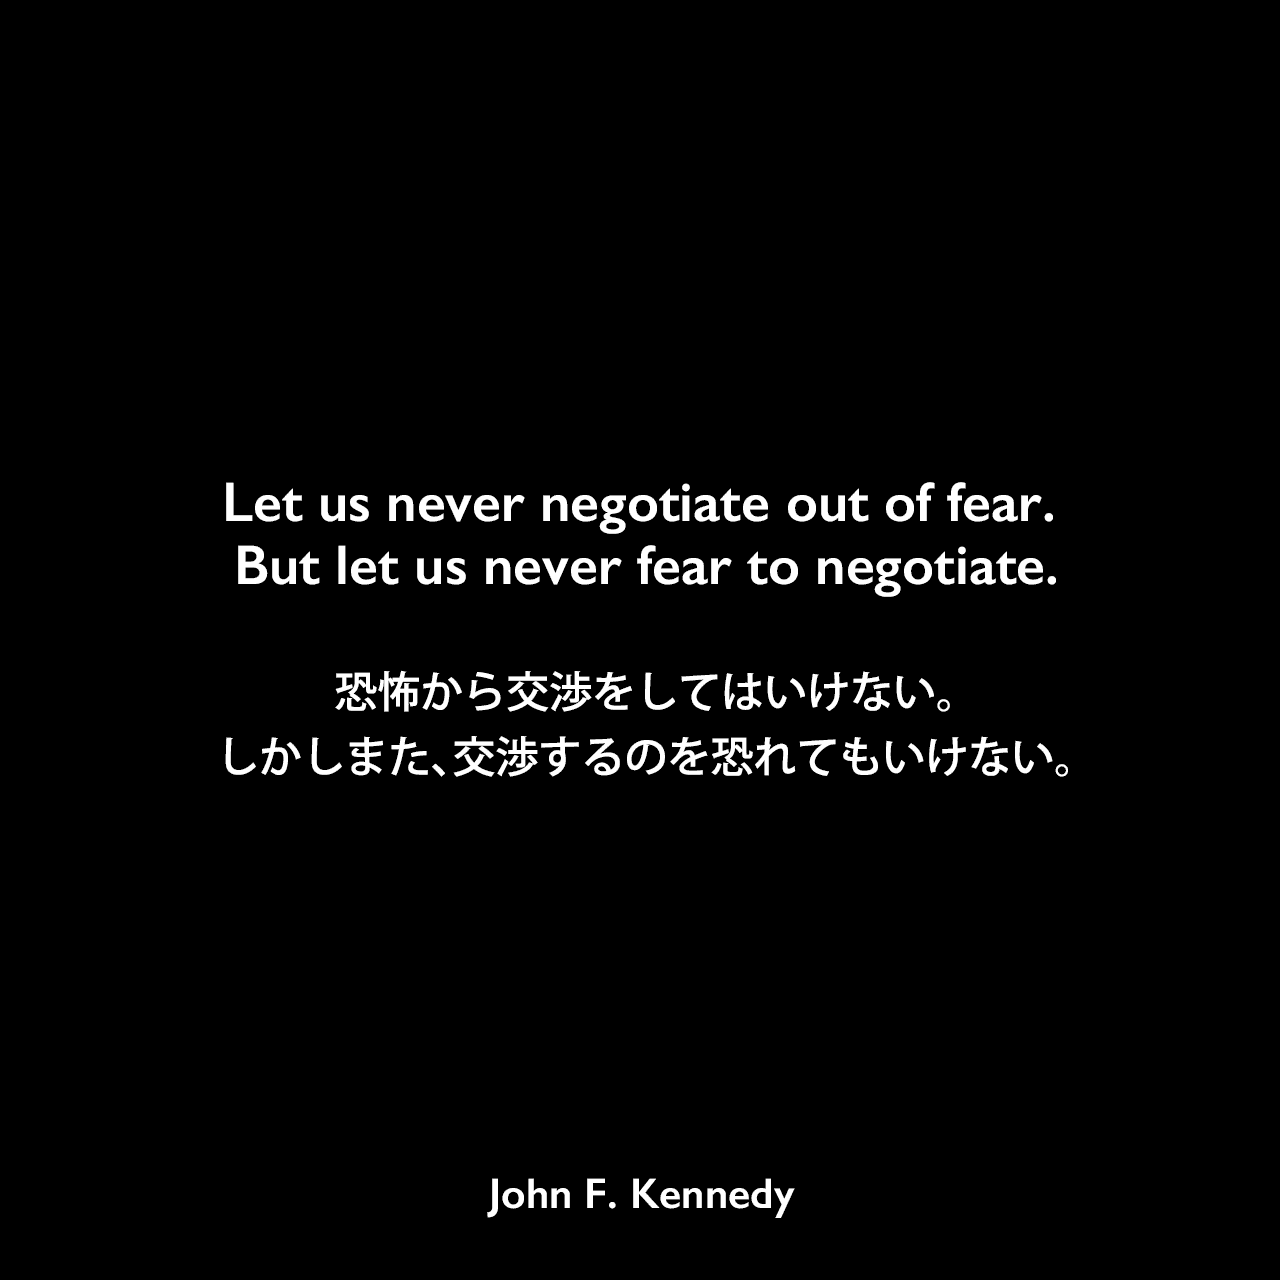 Let us never negotiate out of fear. But let us never fear to negotiate.恐怖から交渉をしてはいけない。しかしまた、交渉するのを恐れてもいけない。- 1961年1月20日の大統領就任演説よりJohn F Kennedy